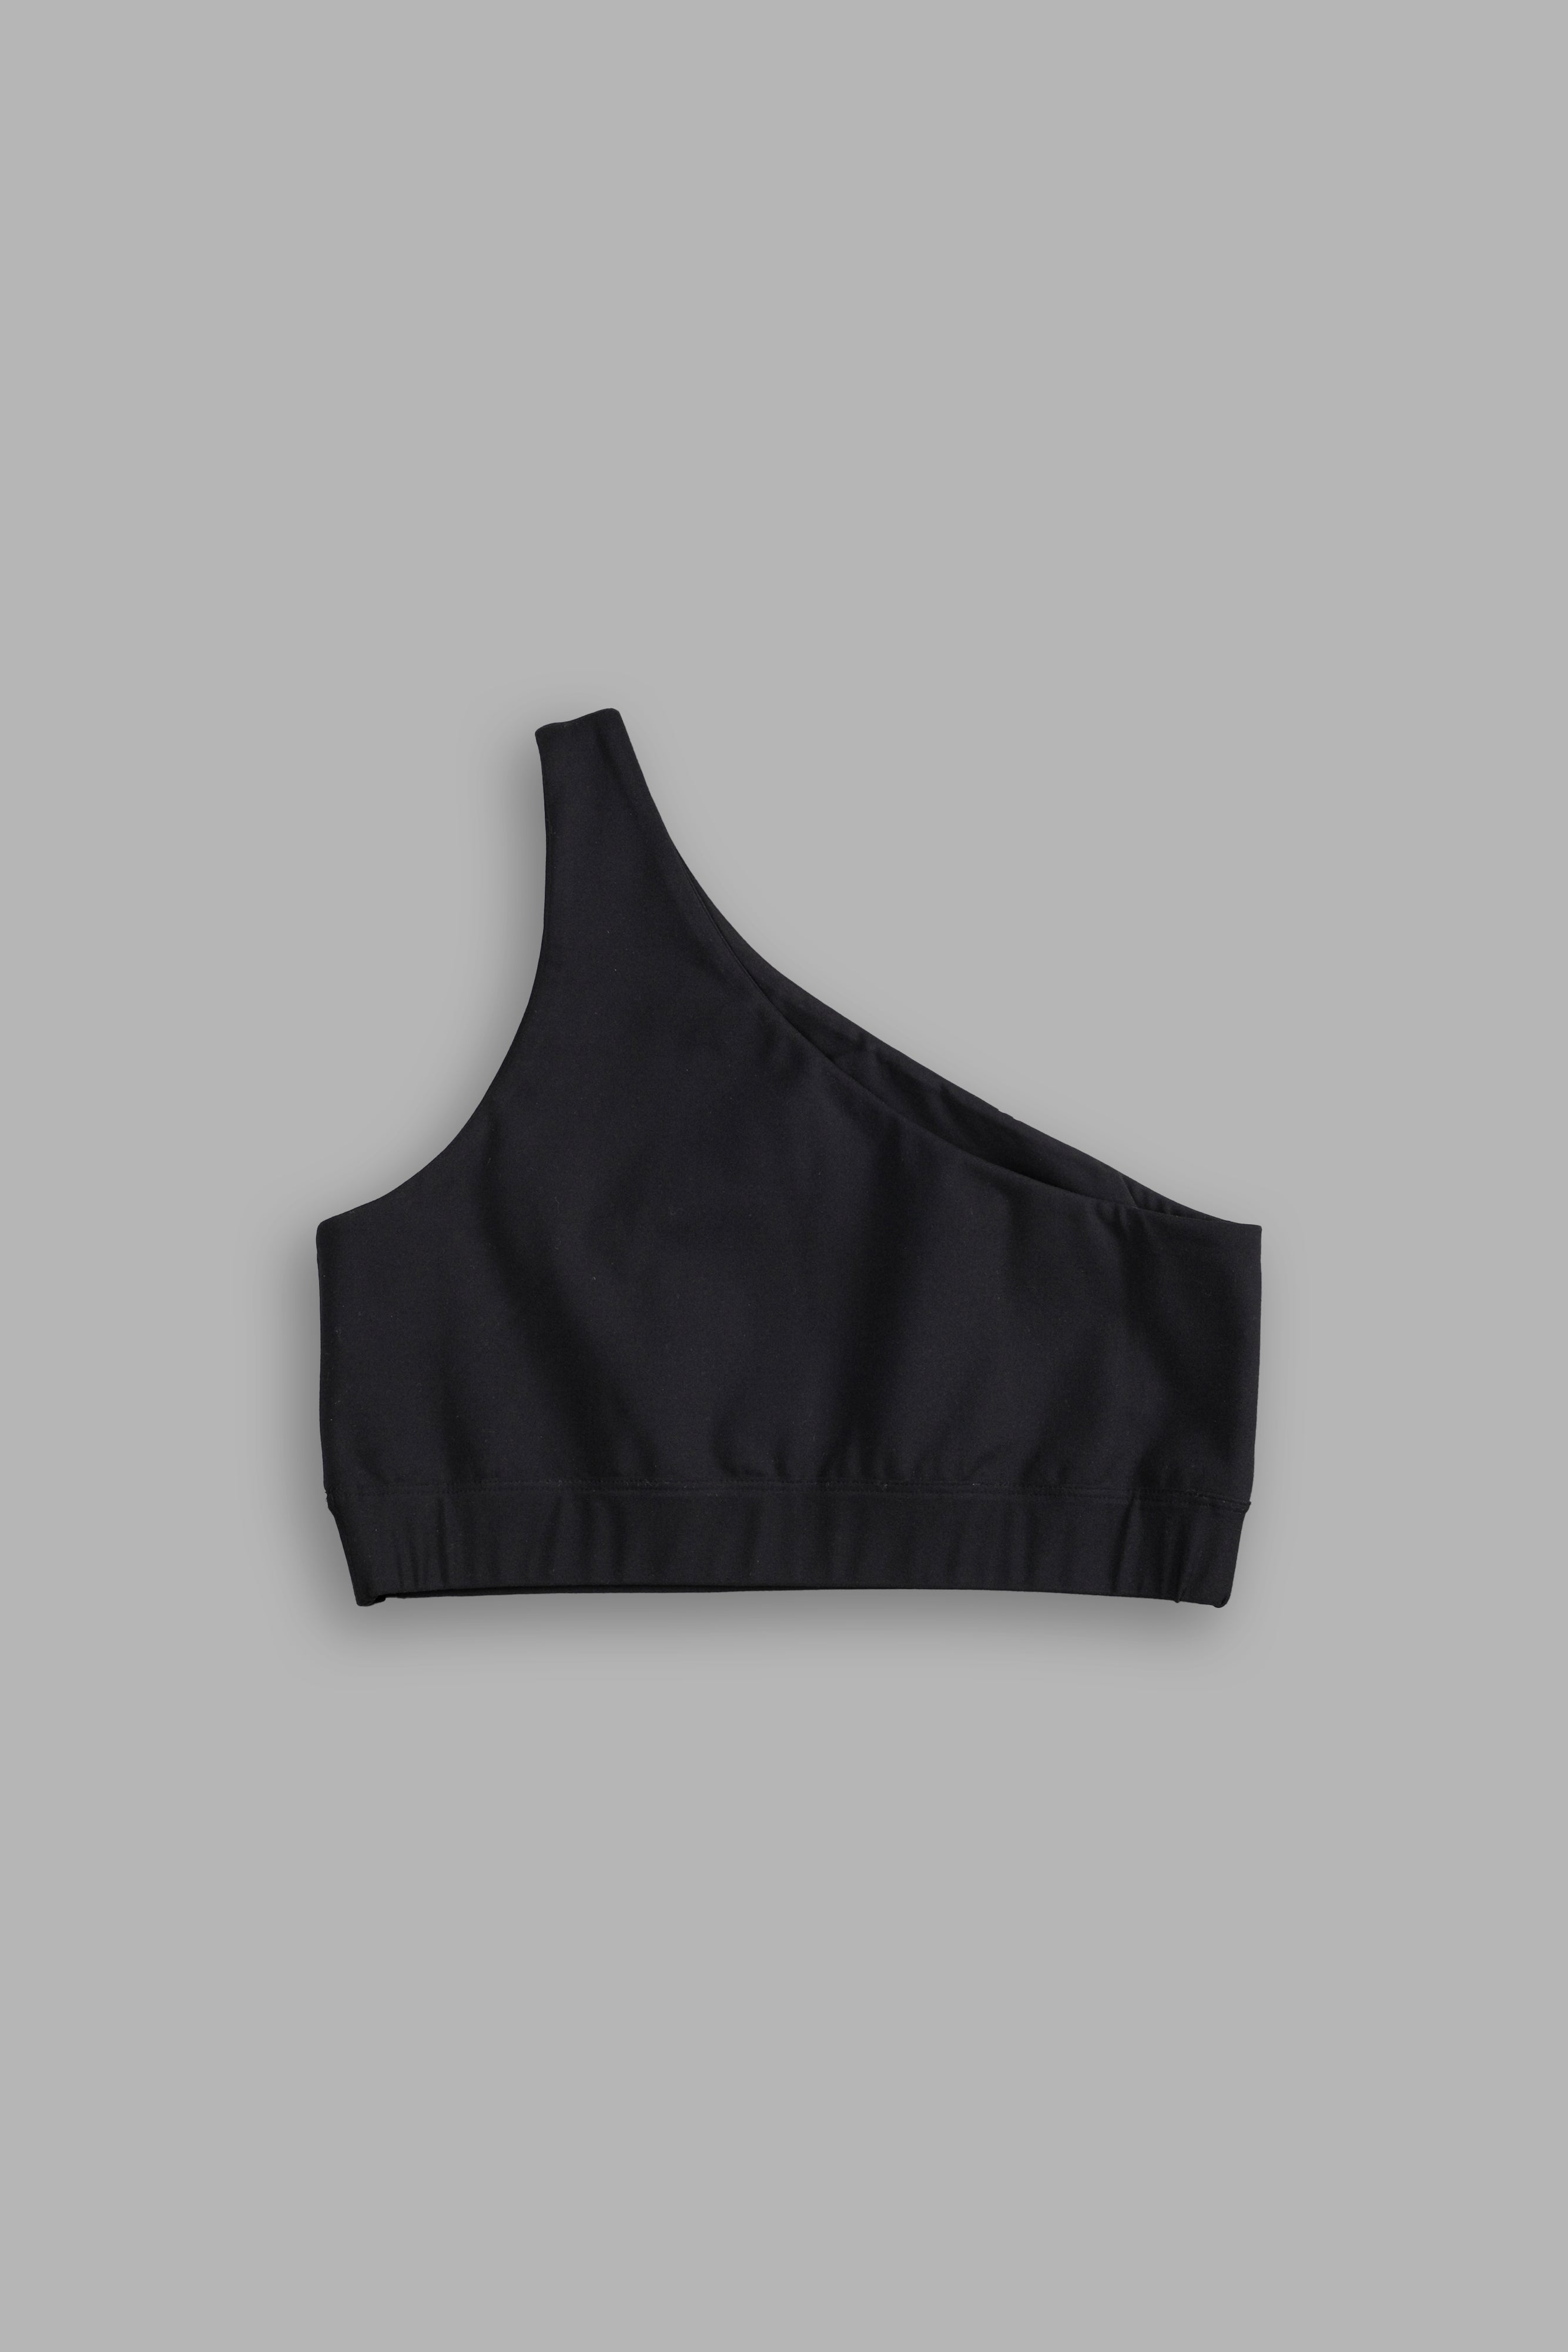 Close To Heart "One Shoulder" Energy Bra in Black